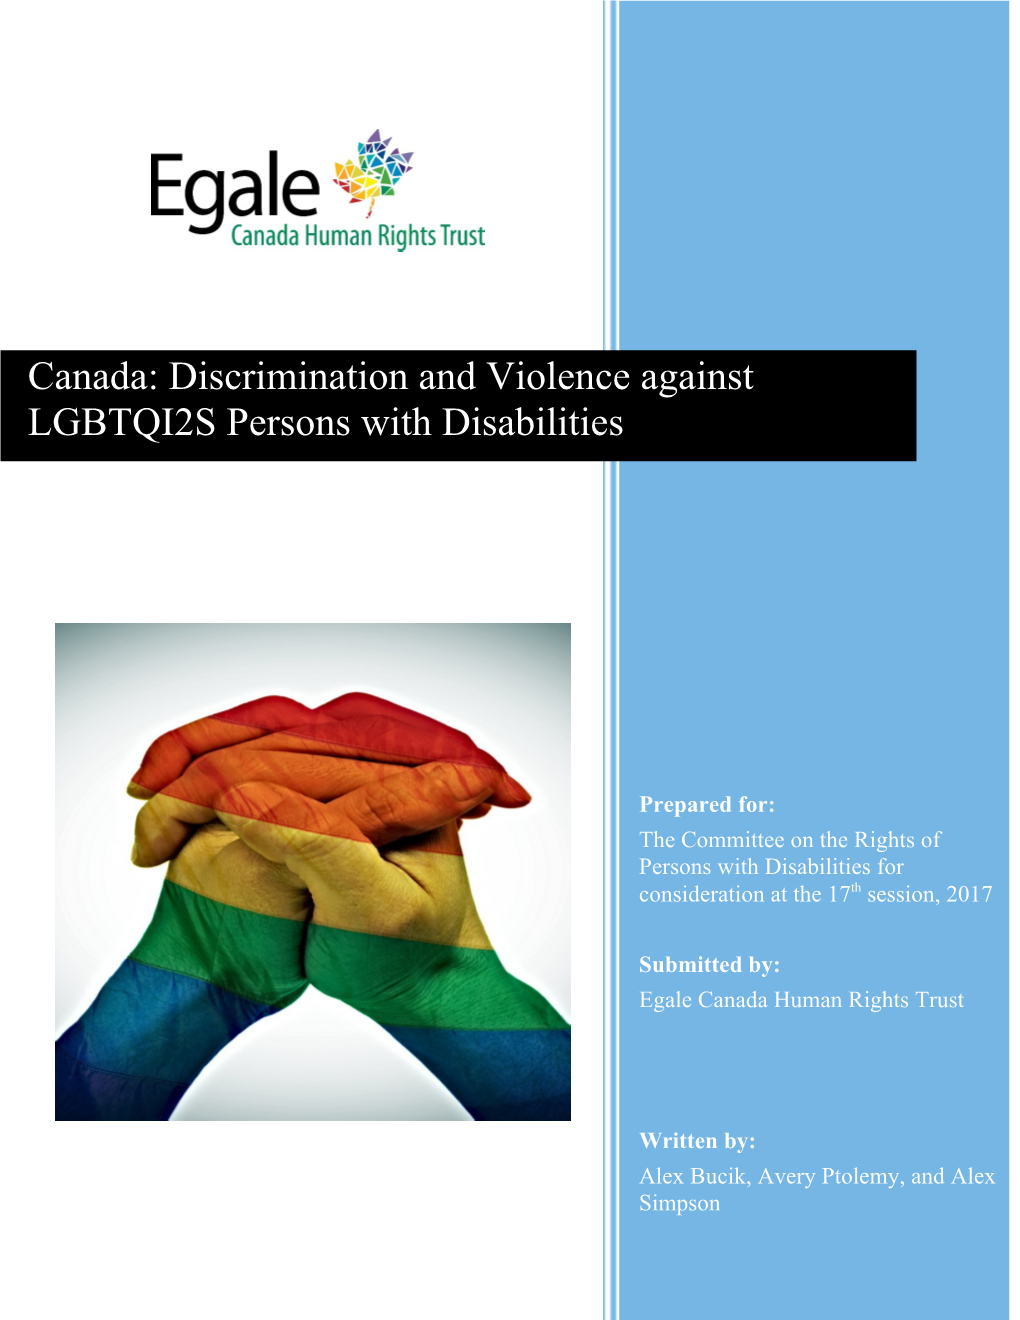 2.0 Intersectionality: LGBTQI2S Persons with Disabilities 5